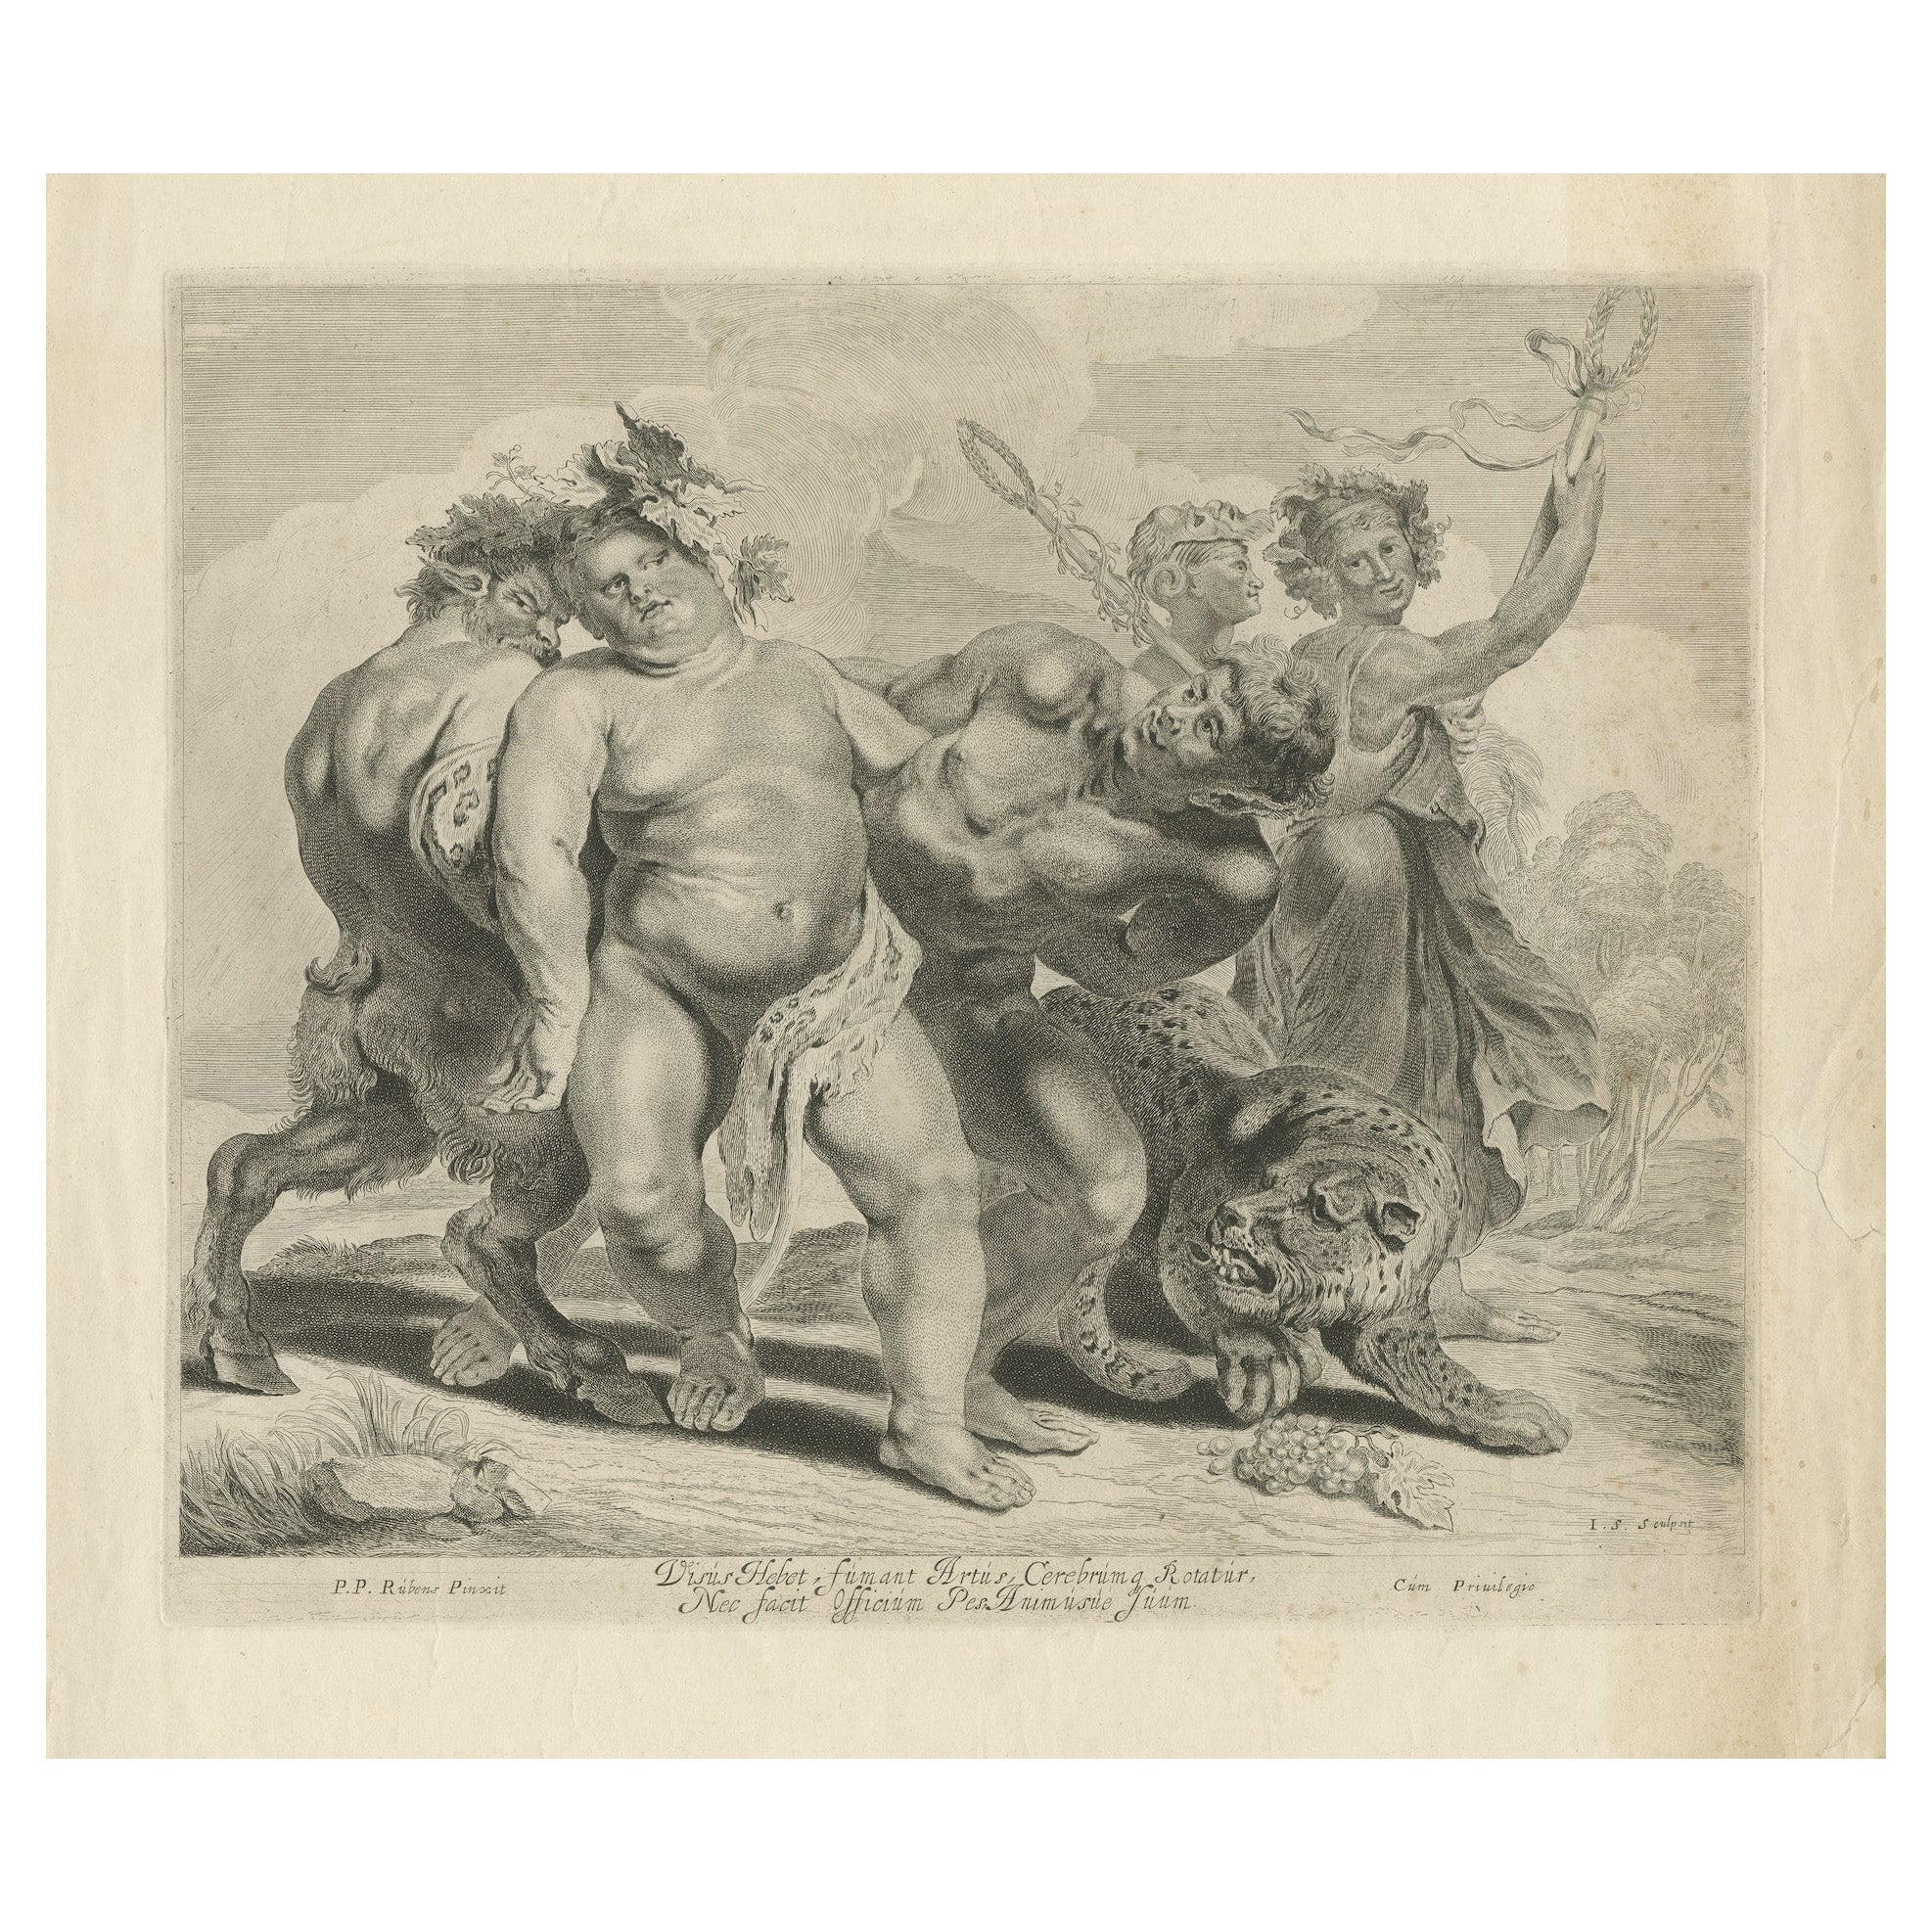 Drunkenness of Bacchus, Original Engraving by Suyderhoff after P.P. Ruben, c1650